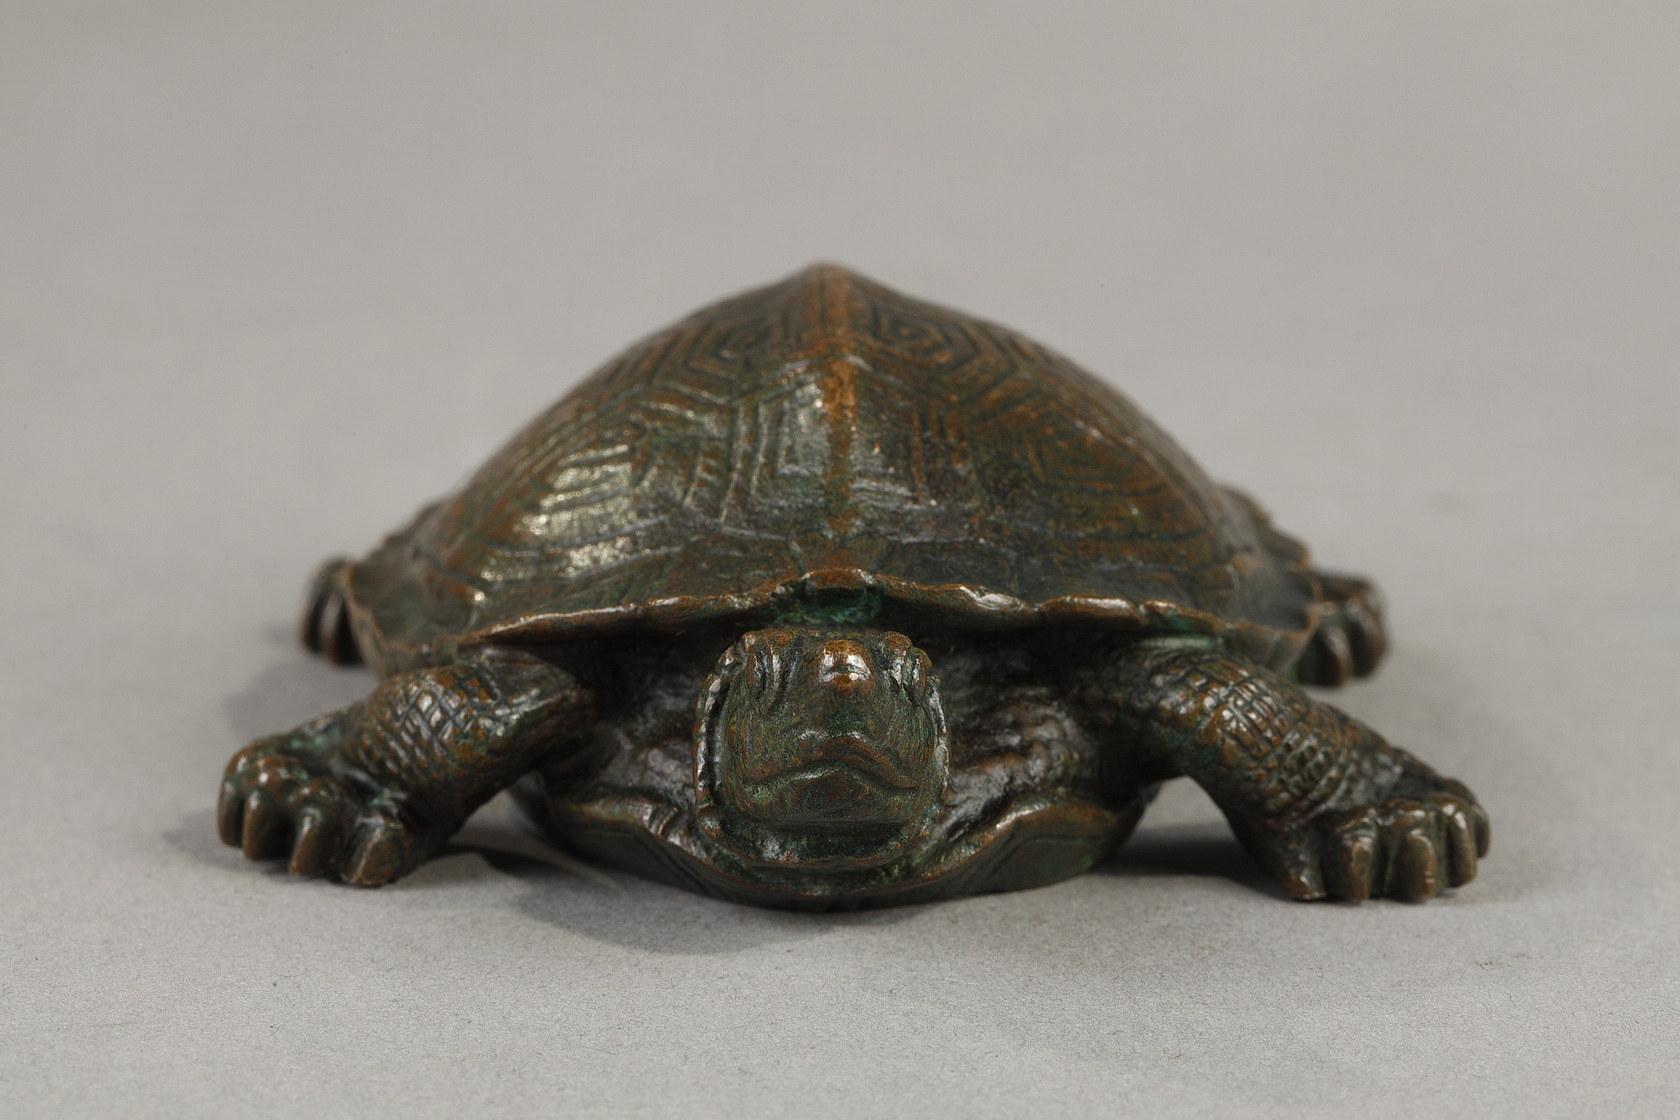 Turtle n°2
(model without base)
by Antoine-Louis Barye (1796-1875)

Bronze sculpture with a nuanced dark brown patina
signed 